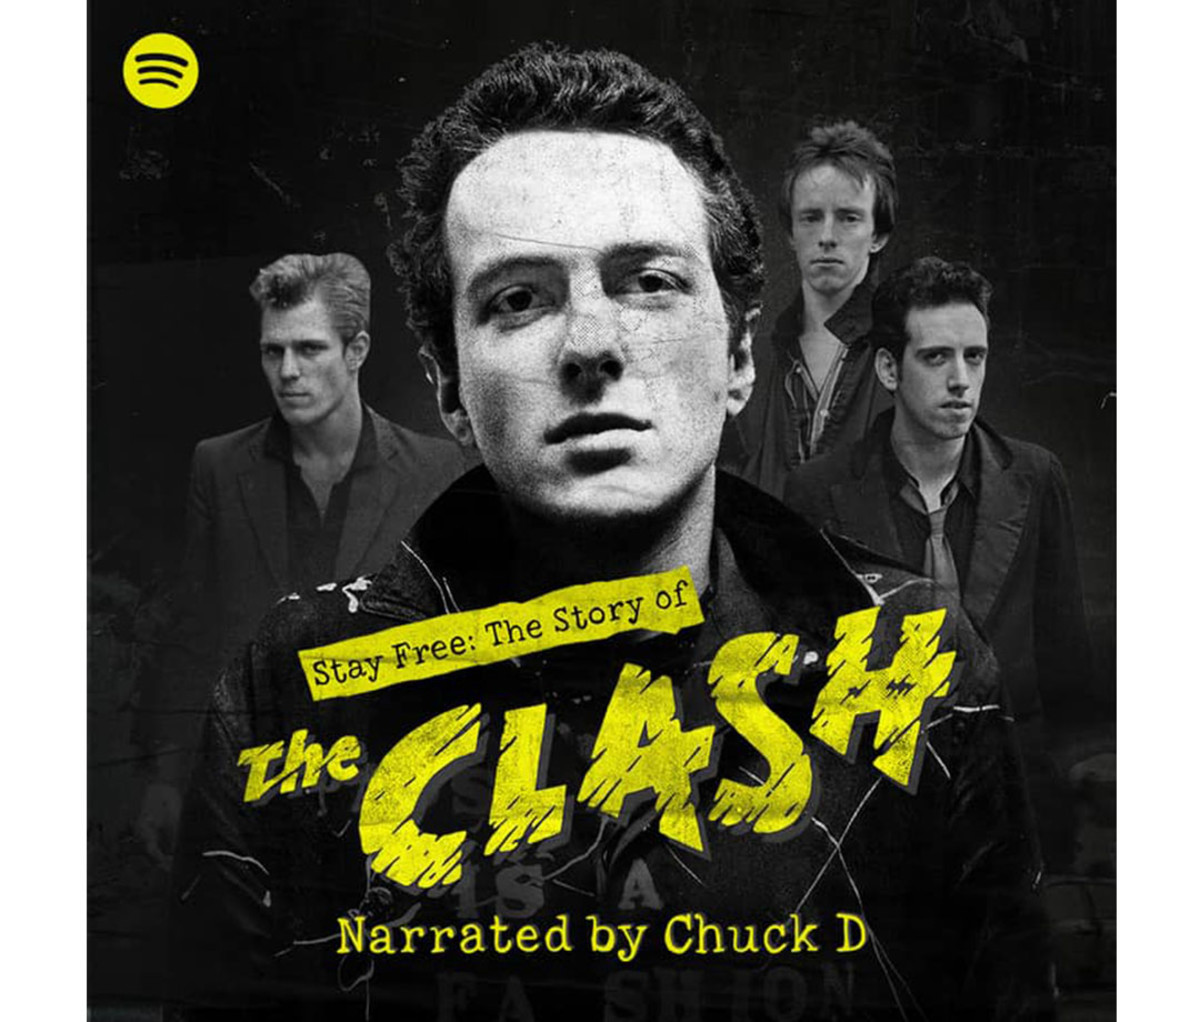 "Stay Free: The Story of The Clash"